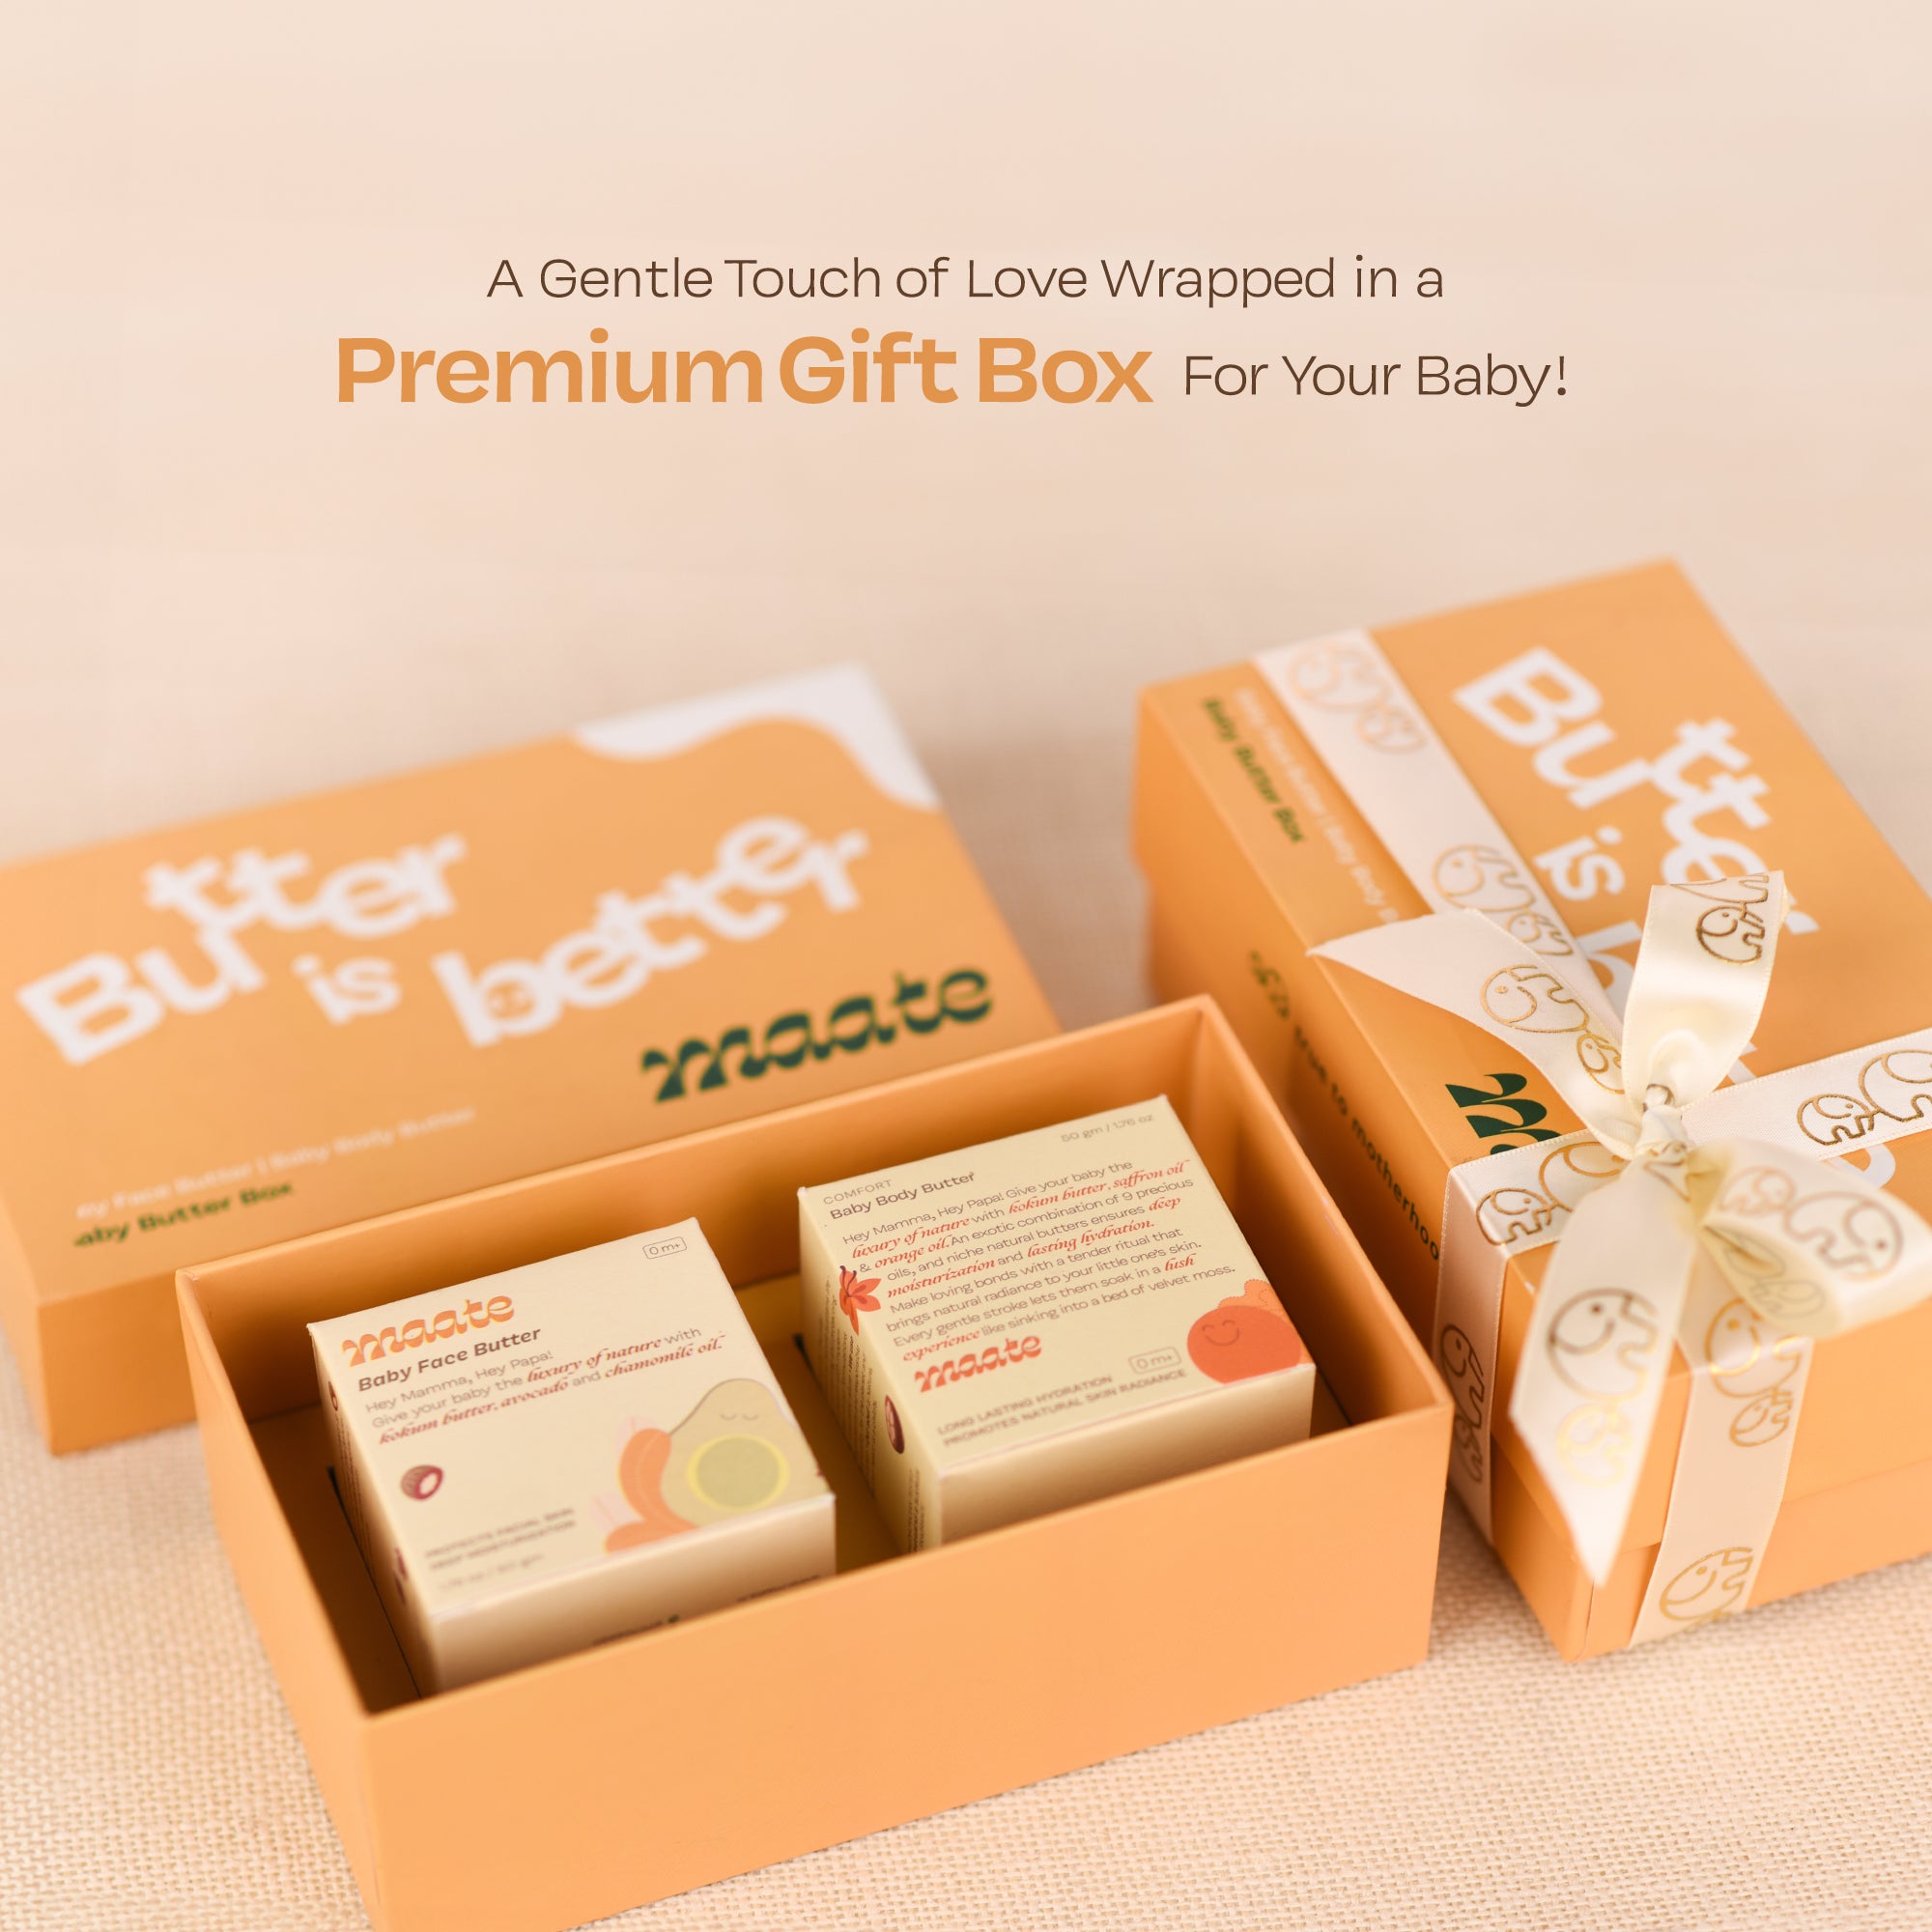 Eid Gifting Made Easy: Thoughtful Presents For Everyone - SnackMagic Blog